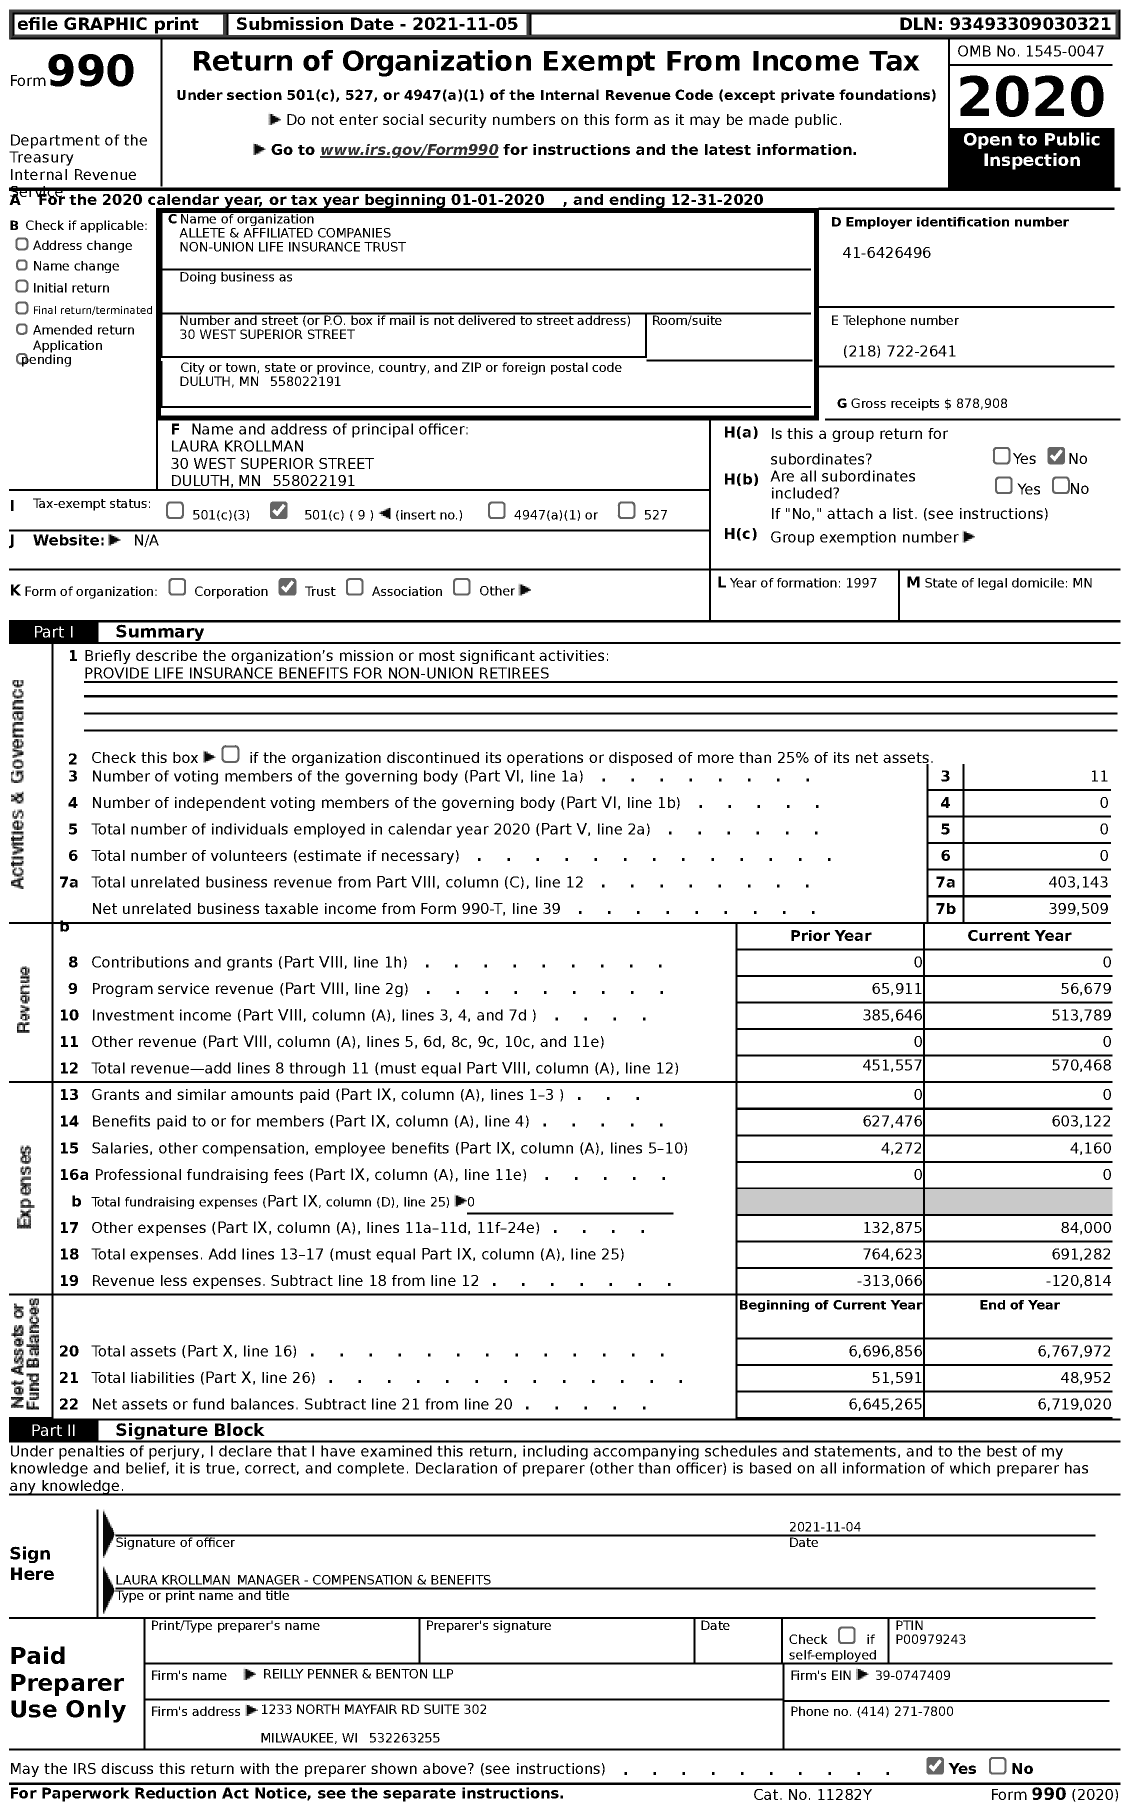 Image of first page of 2020 Form 990 for Allete and Affiliated Companies Non-Union Life Insurance Trust